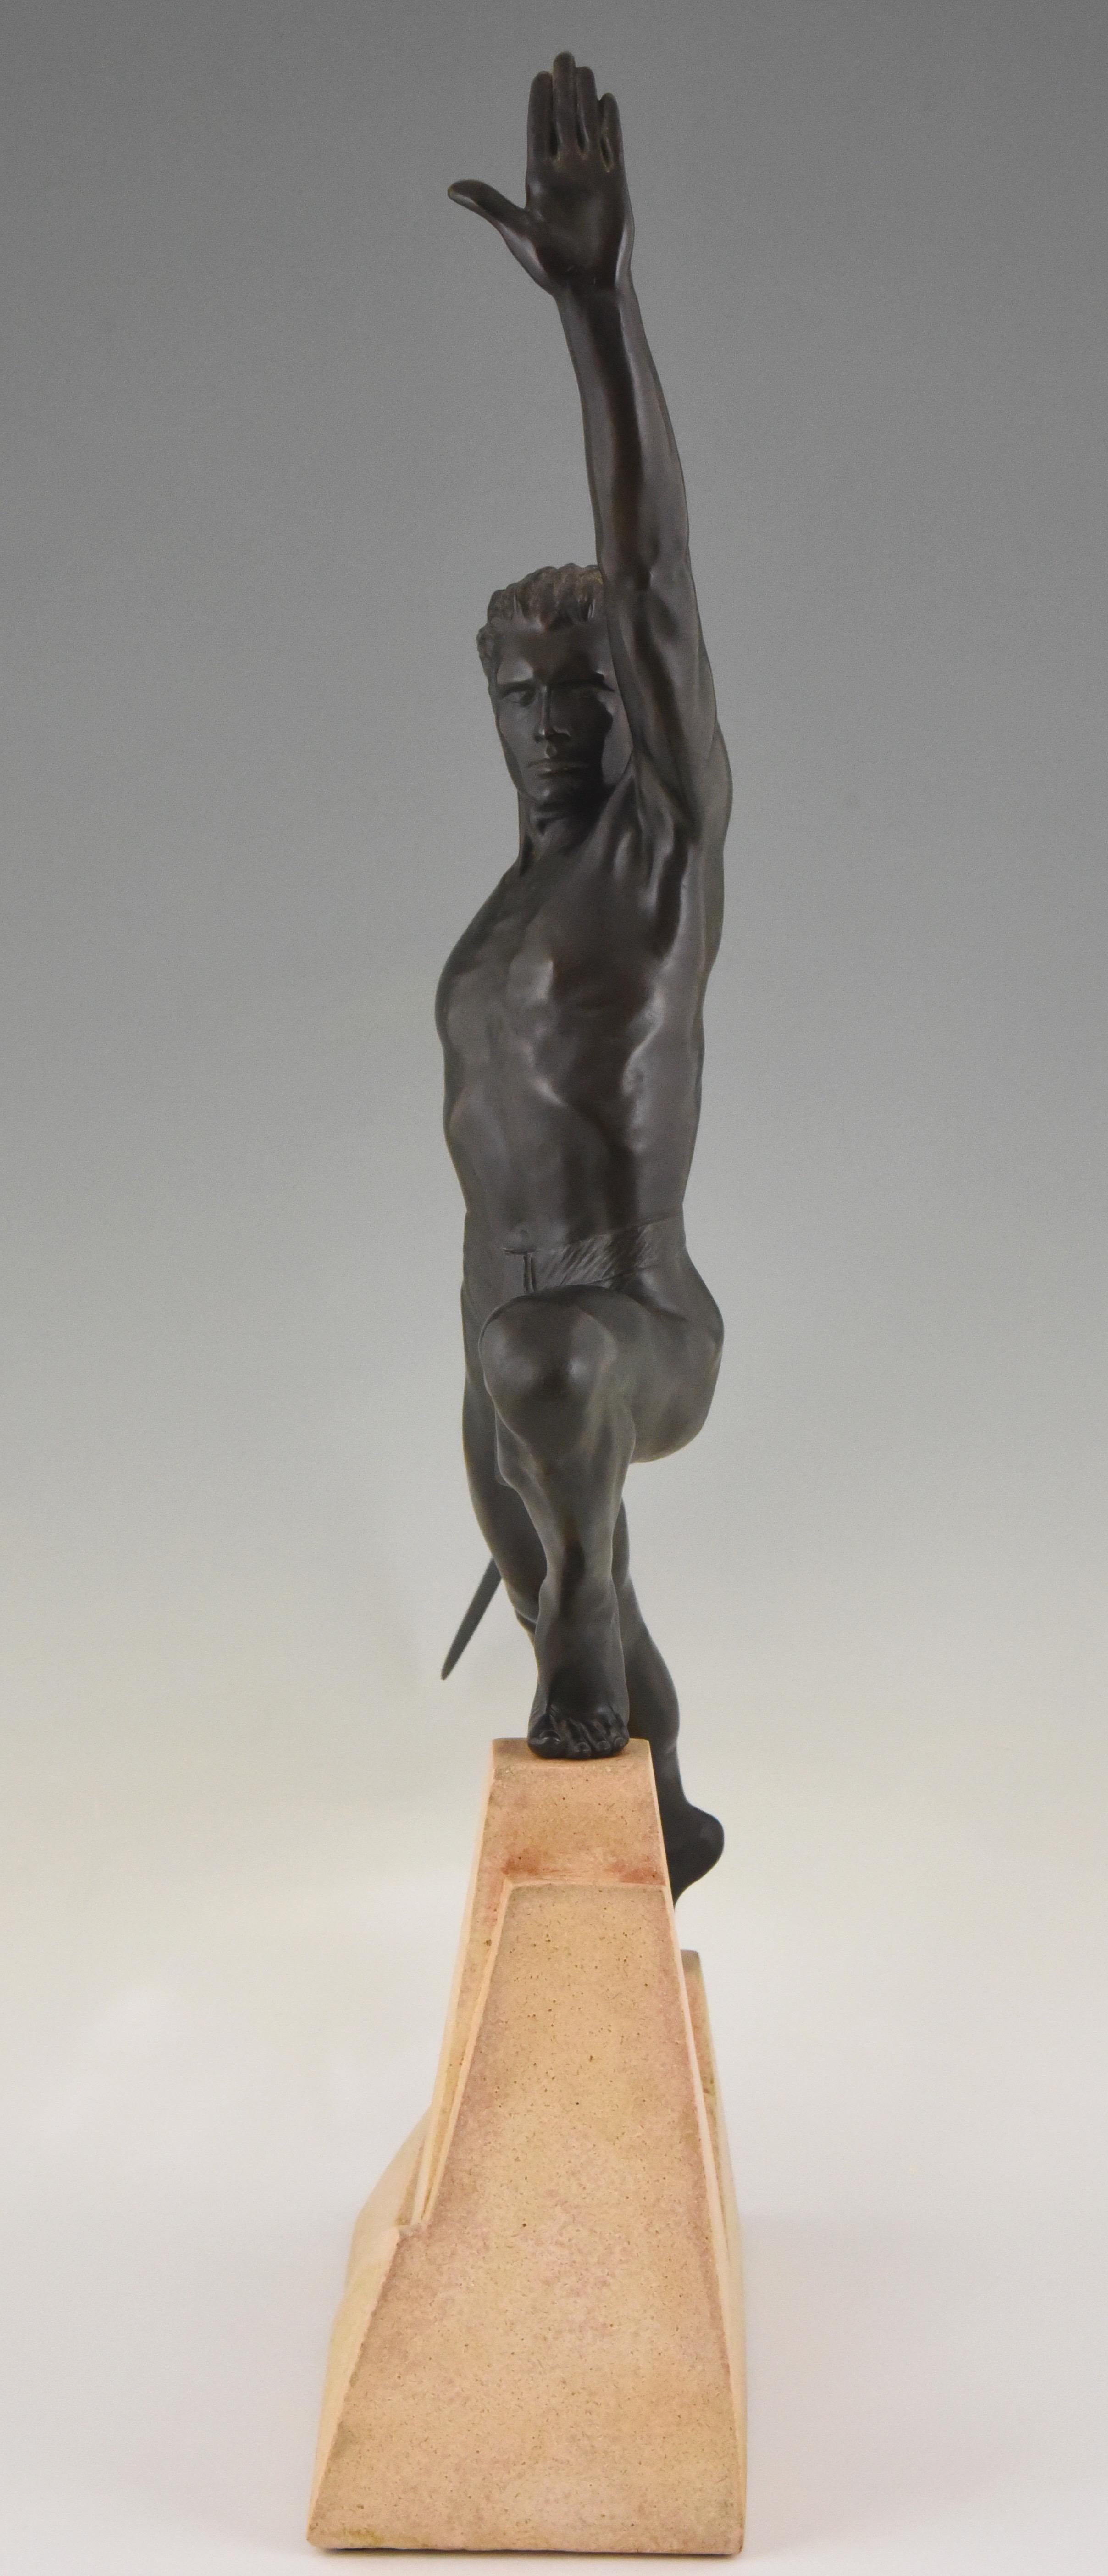 Patinated Art Deco Sculpture Sword Fighter on a Rock, the Challenge Max Le Verrier, 1930